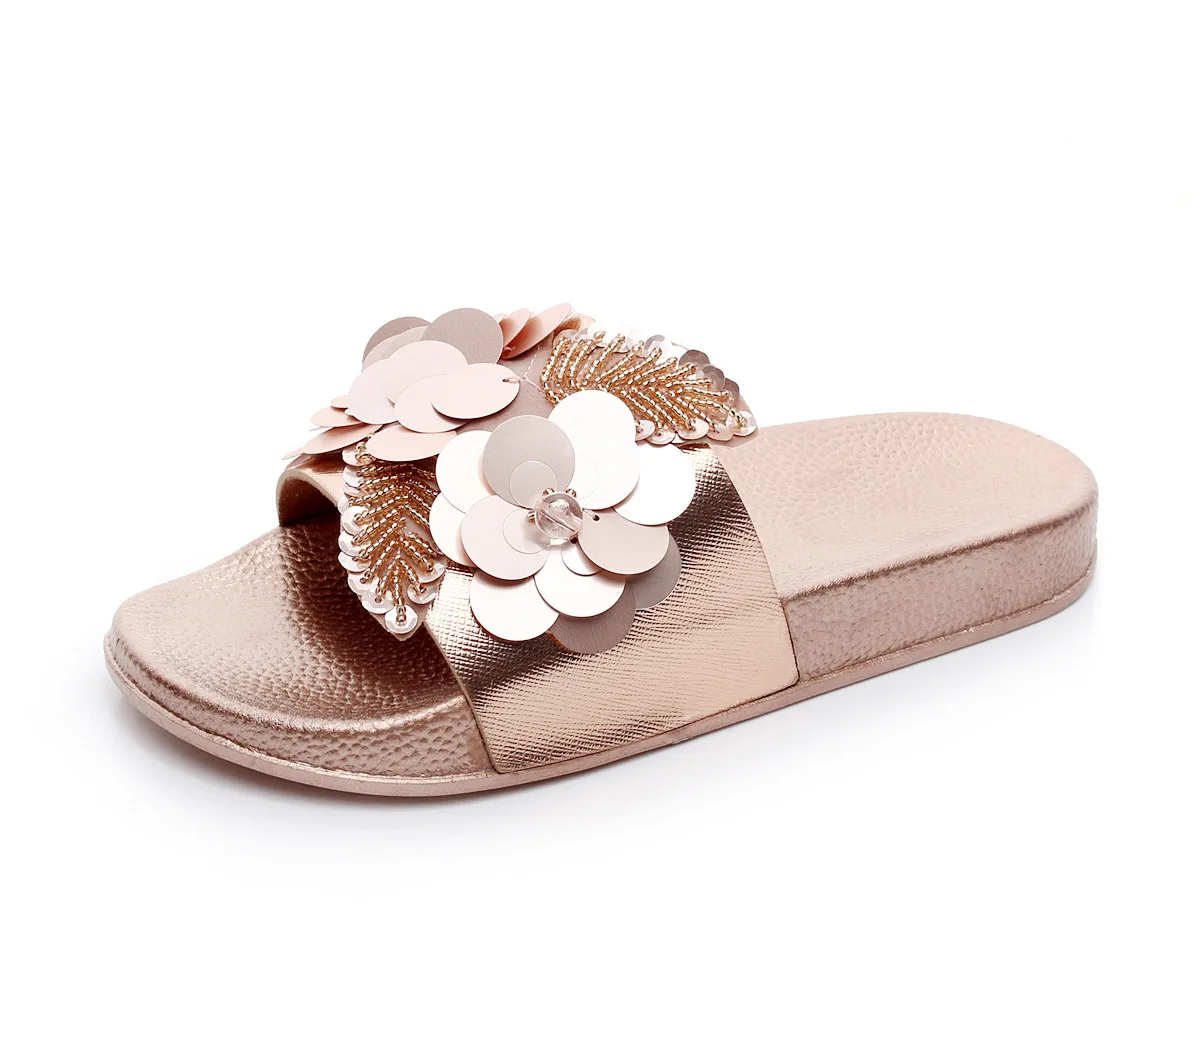 New Women Bright Slippers Spring Summer Autumn Home Beach Slippers Home Flip Flops Comfortable Flat Shoes 988